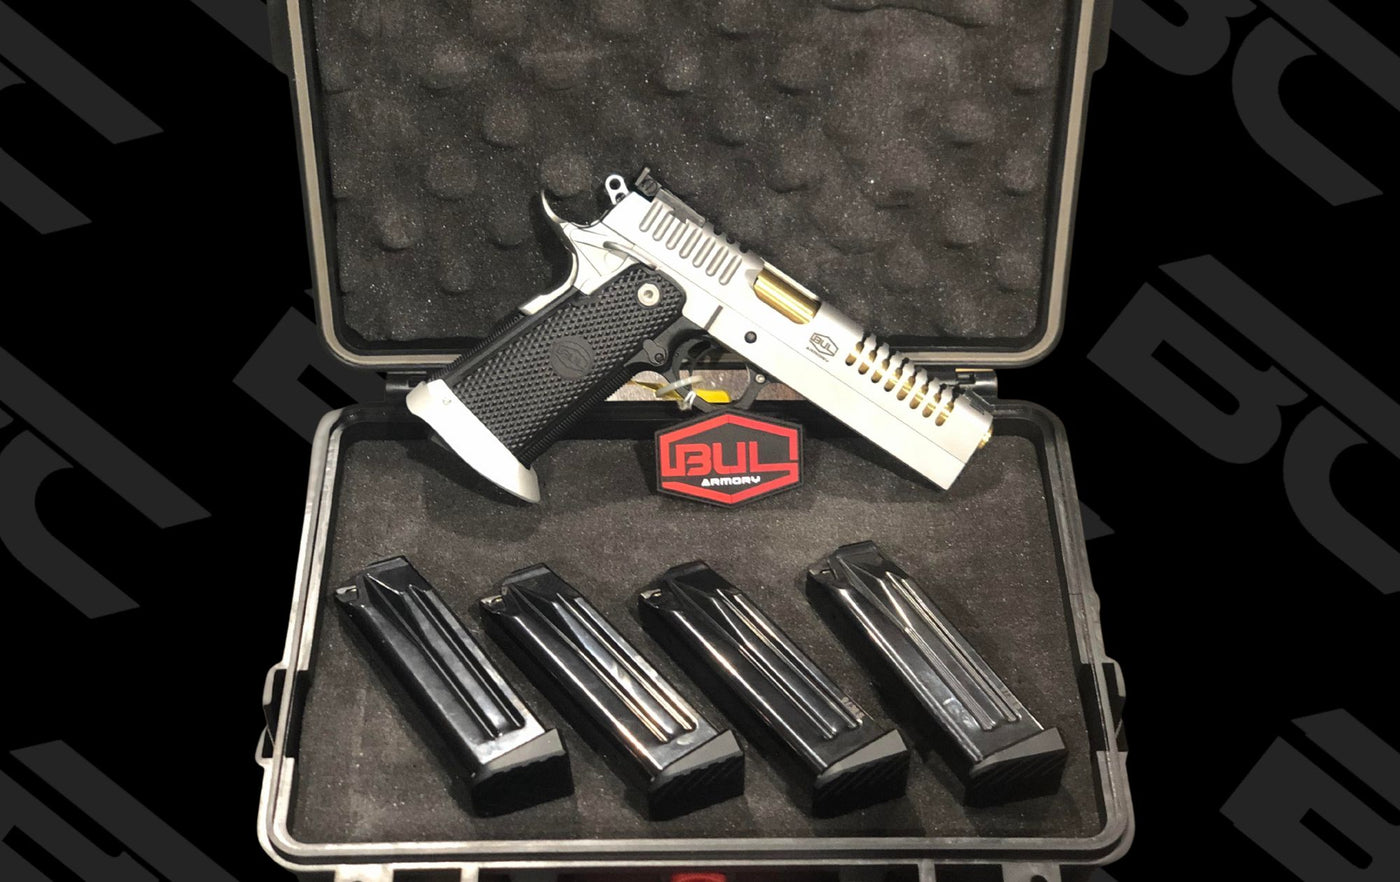 Bul Armory: A Closer Look at Their Range of 2011 Pistols.